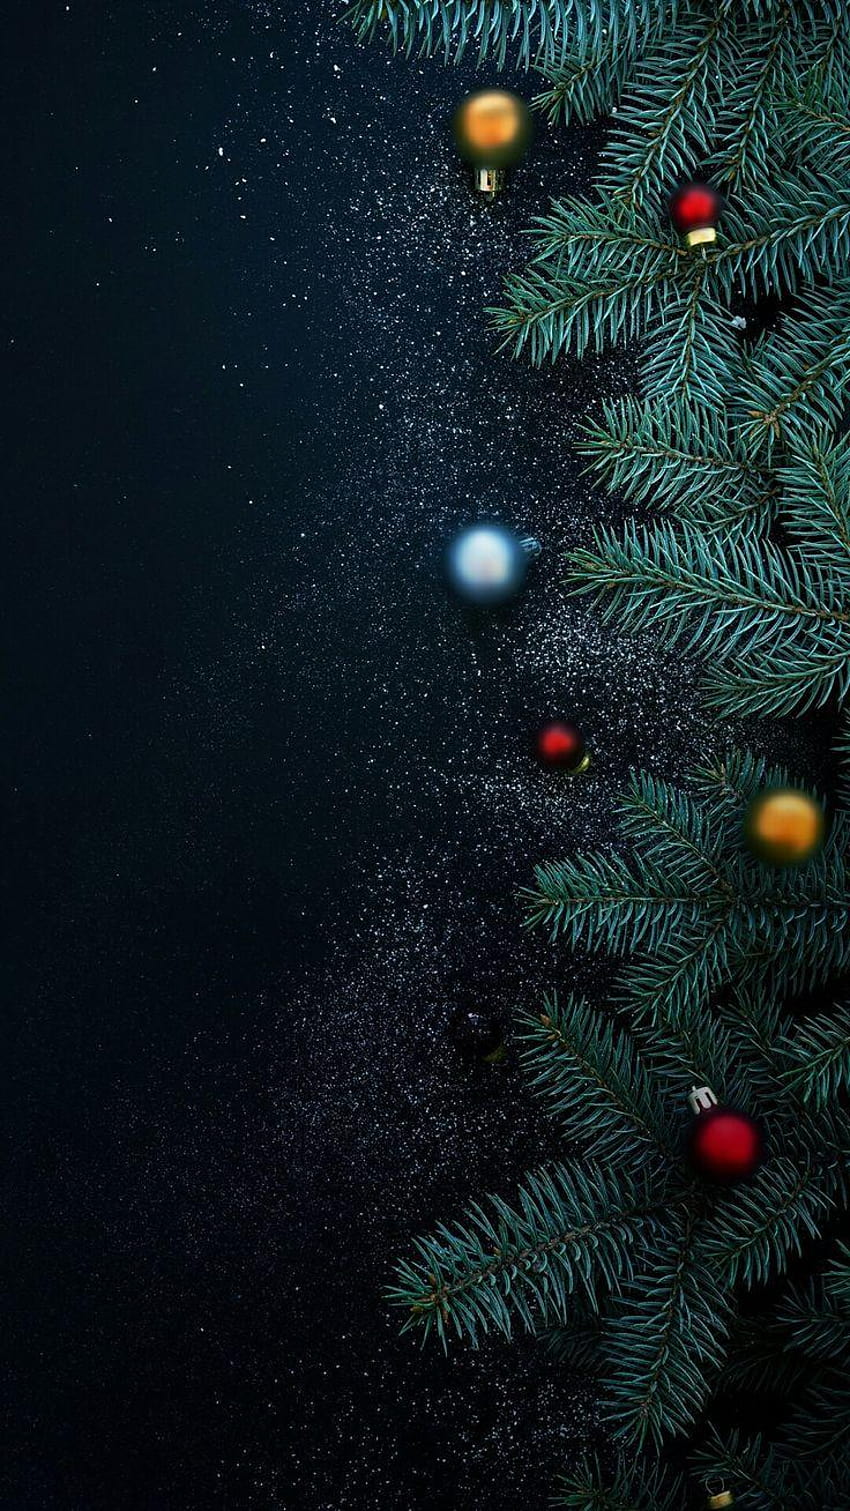 35 Free Vintage Christmas Wallpaper Options For iPhone Wallpaper Download   MOONAZ